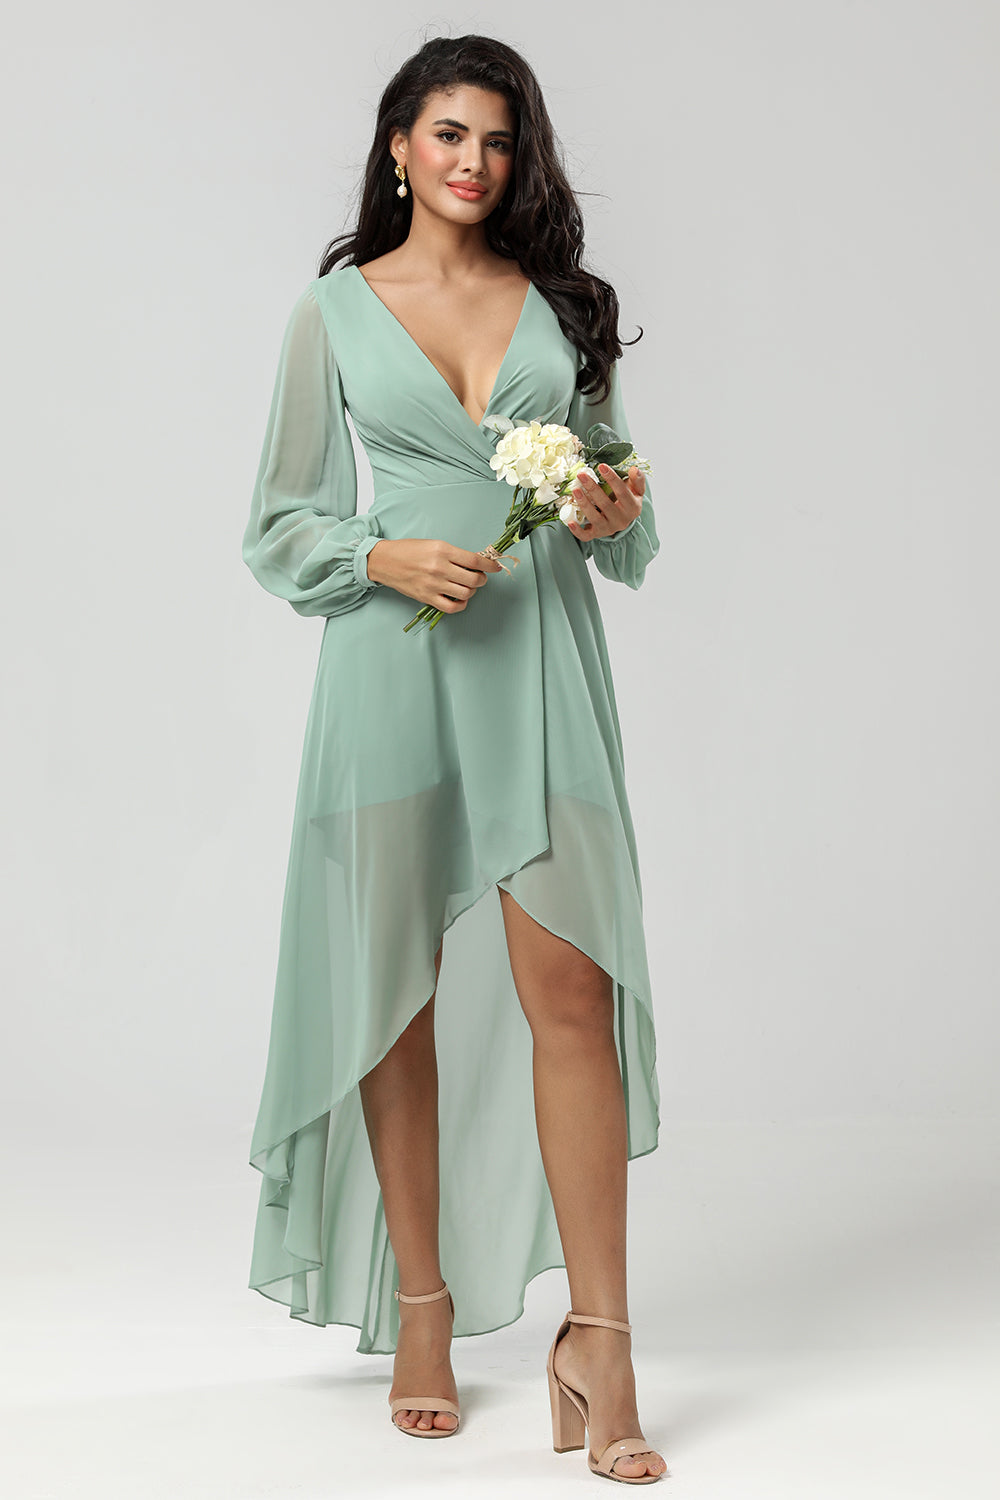 High-low Chiffon A Line Green Bridesmaid Dress with Long Sleeves